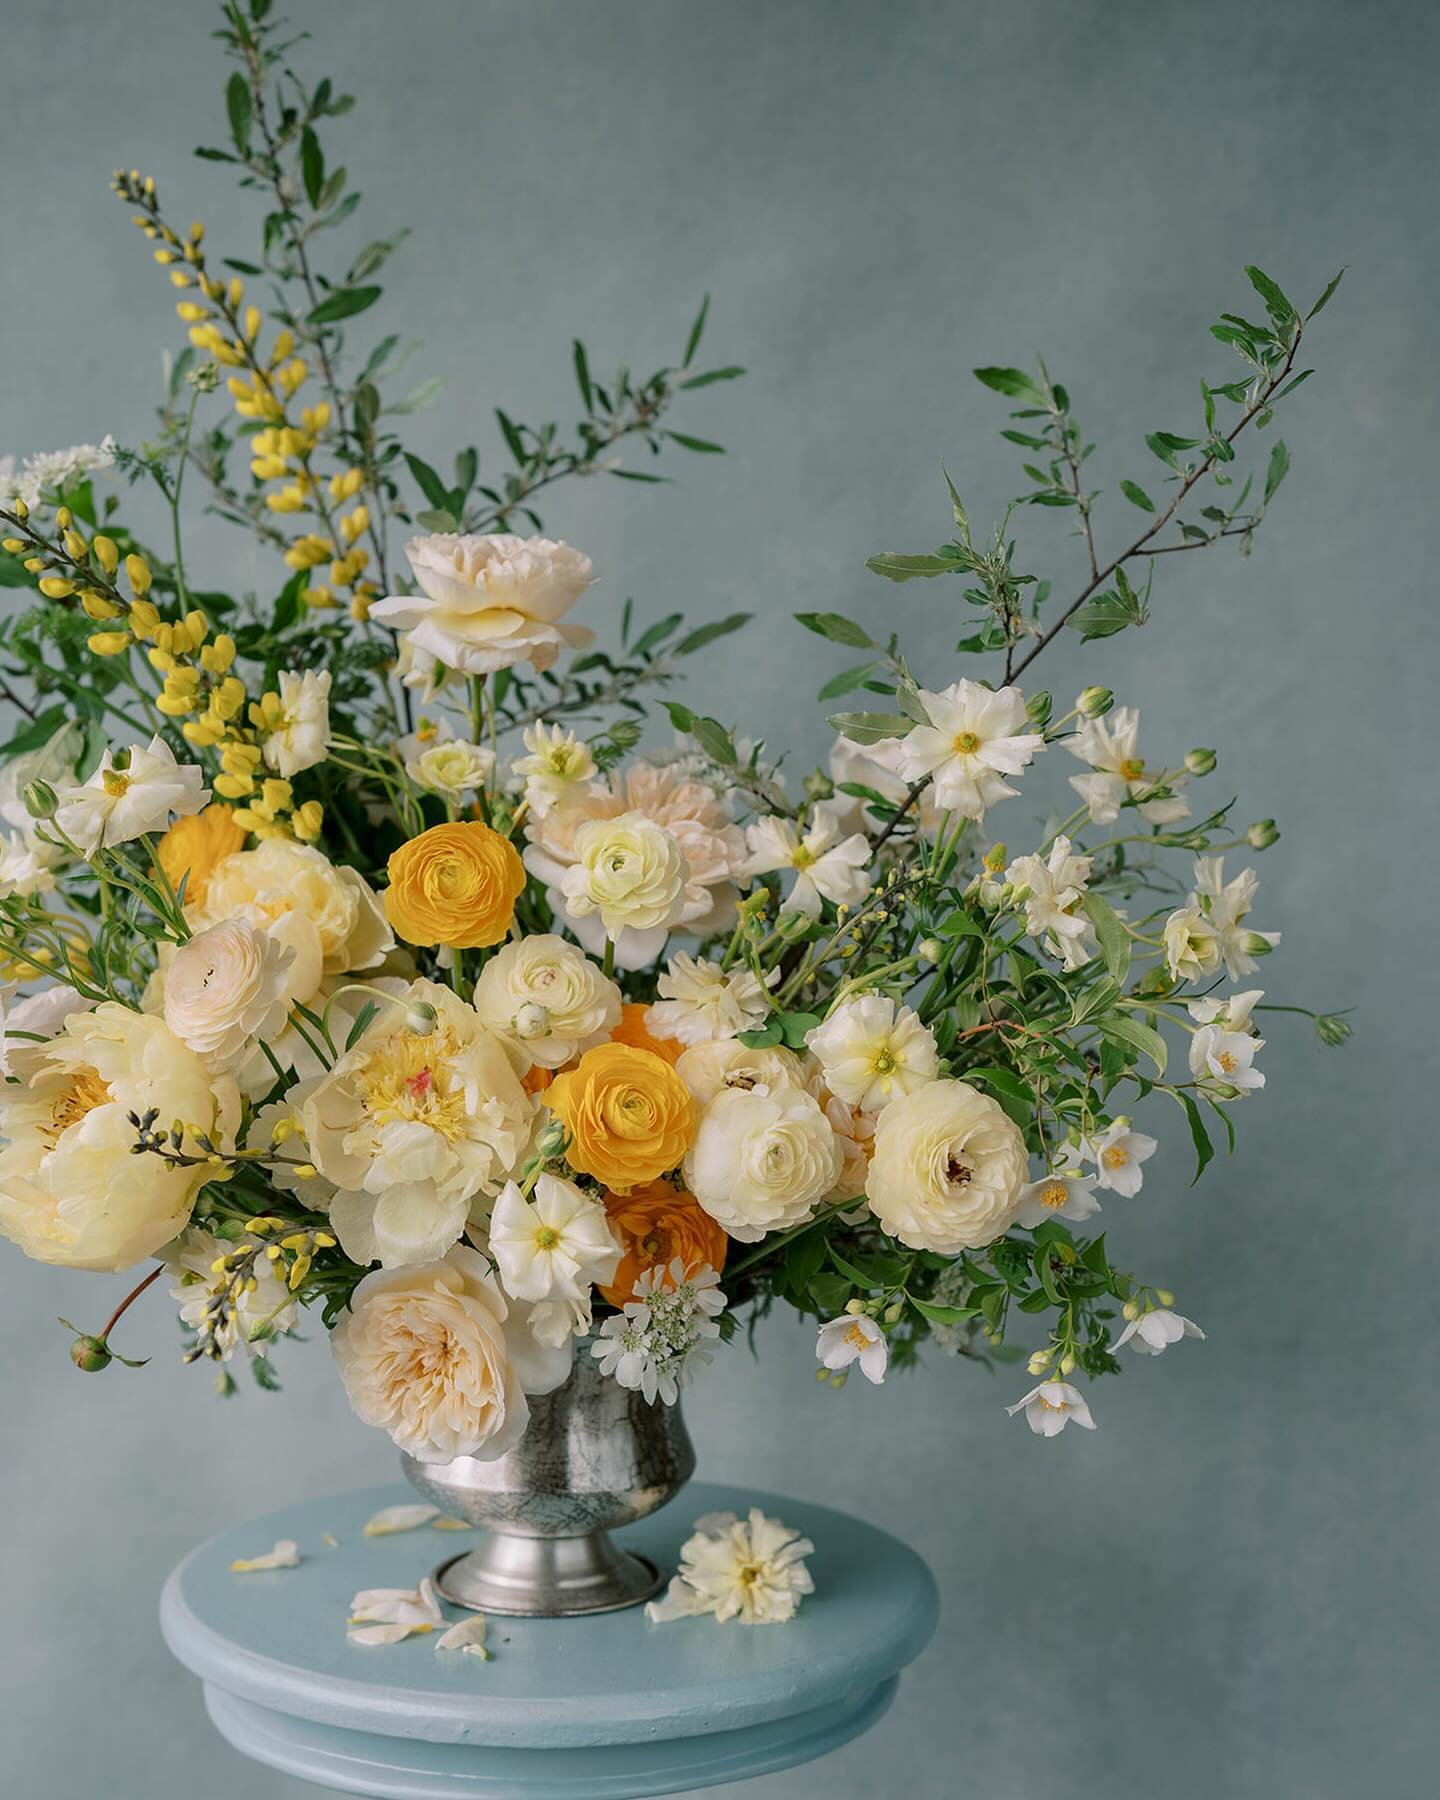 So many favorite flowers in this arrangement: peonies, ranunculus, mockorange, baptisia, orlaya, garden roses &amp; butterfly ranunculus 💛 And you&rsquo;d better believe that I planned this palette for our Floral Design Essentials class around the L